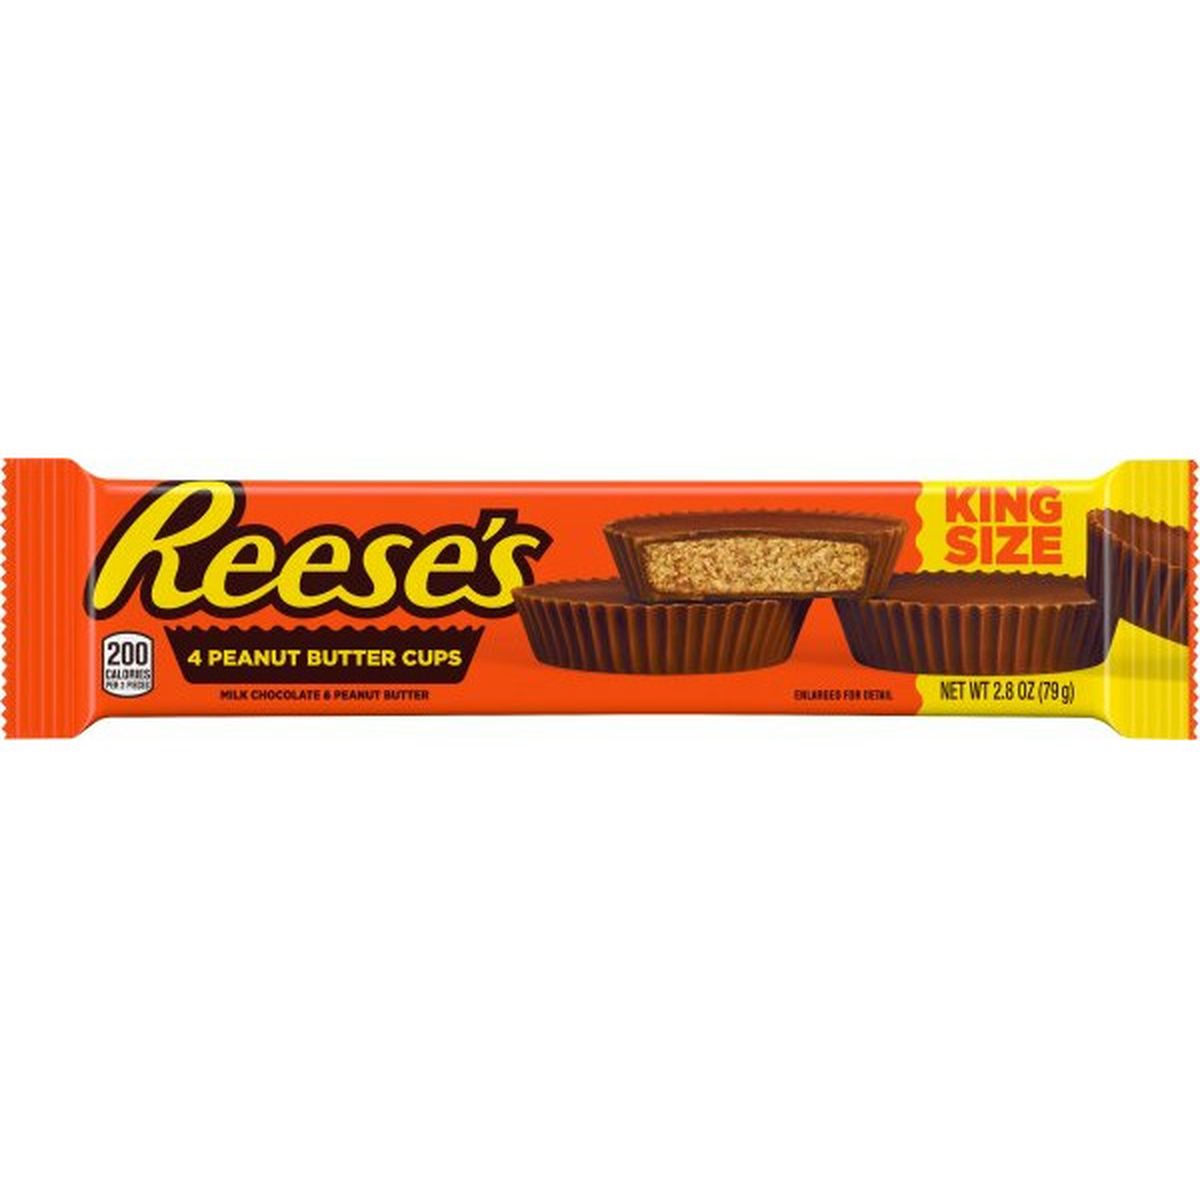 Calories in Reese's Peanut Butter Cups, King Size